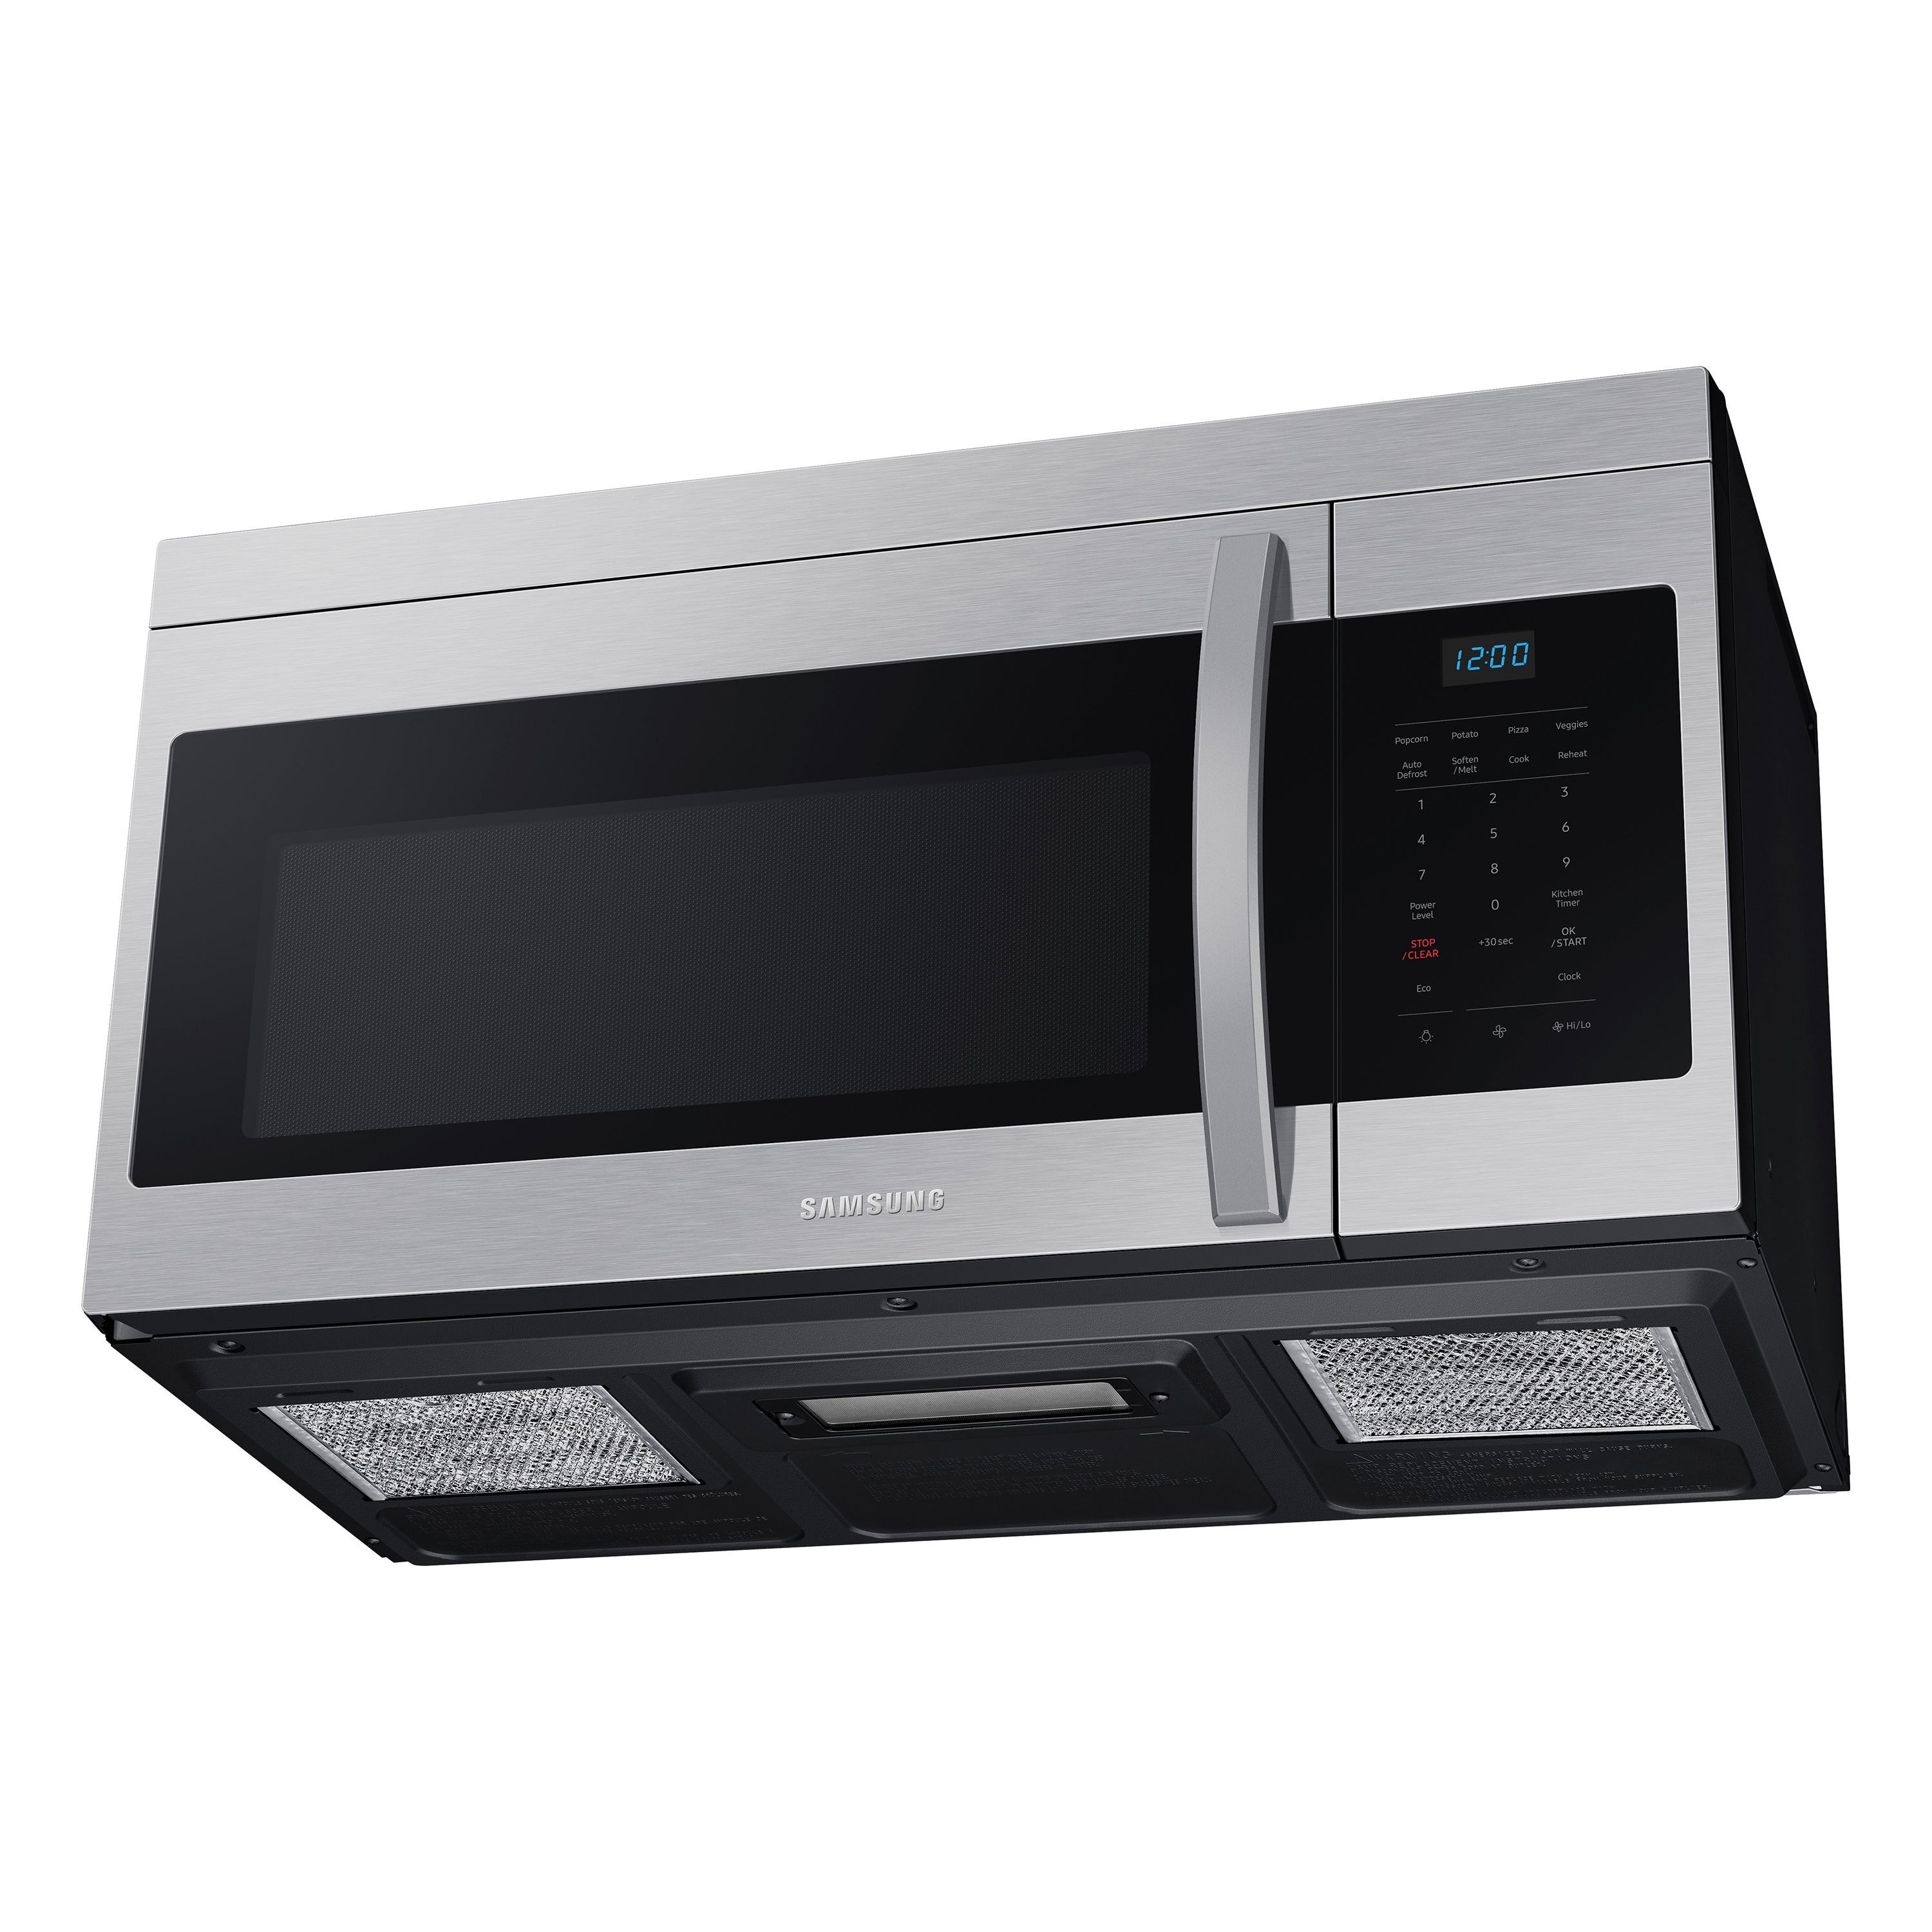 Do Over the Range Microwaves Have to be Vented Outside? – Pro Line Appliance